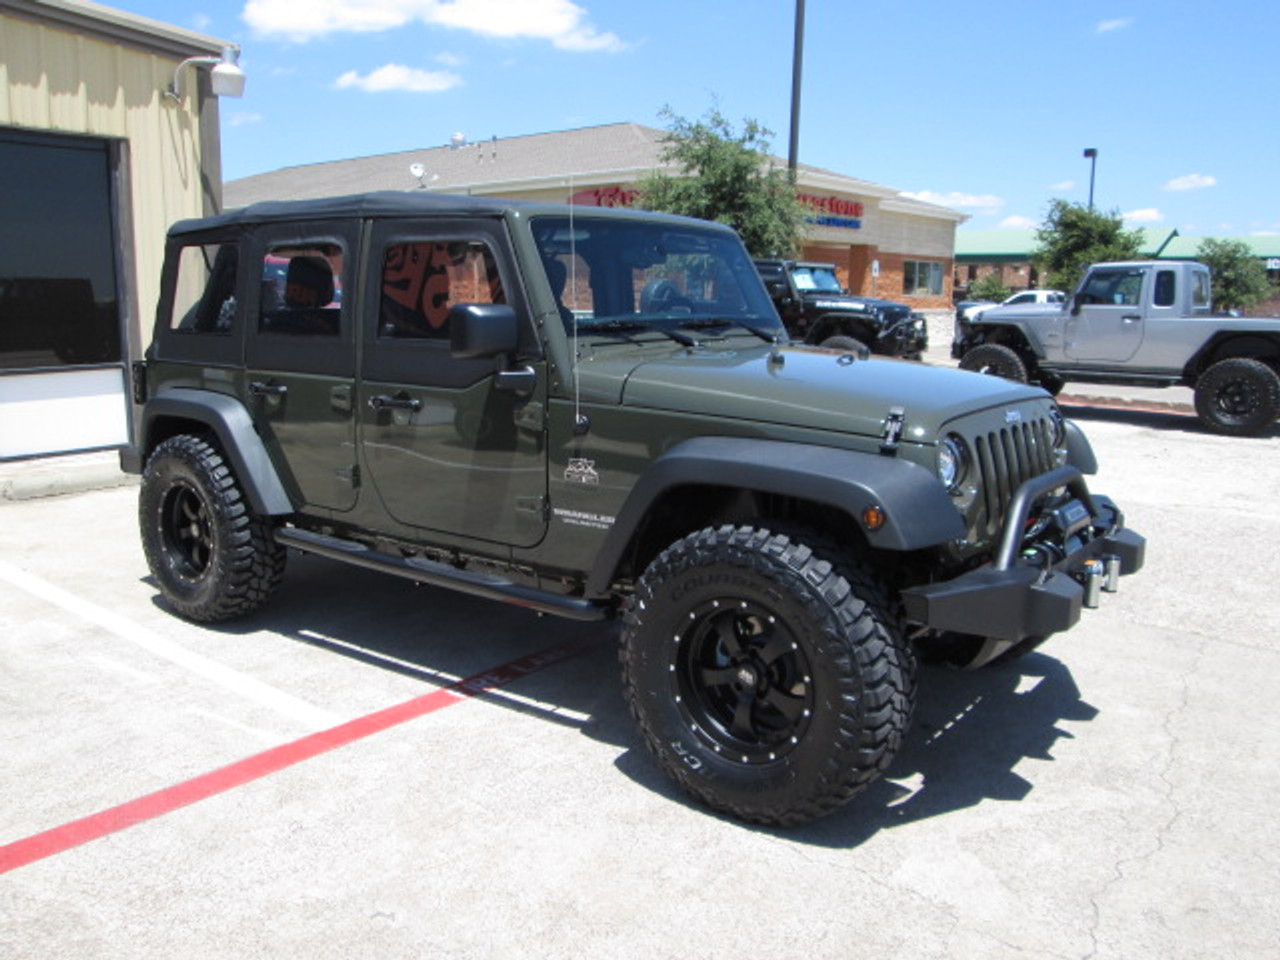 SOLD 2015 Black Mountain Conversions Unlimited Jeep Wrangler Stock# 734010